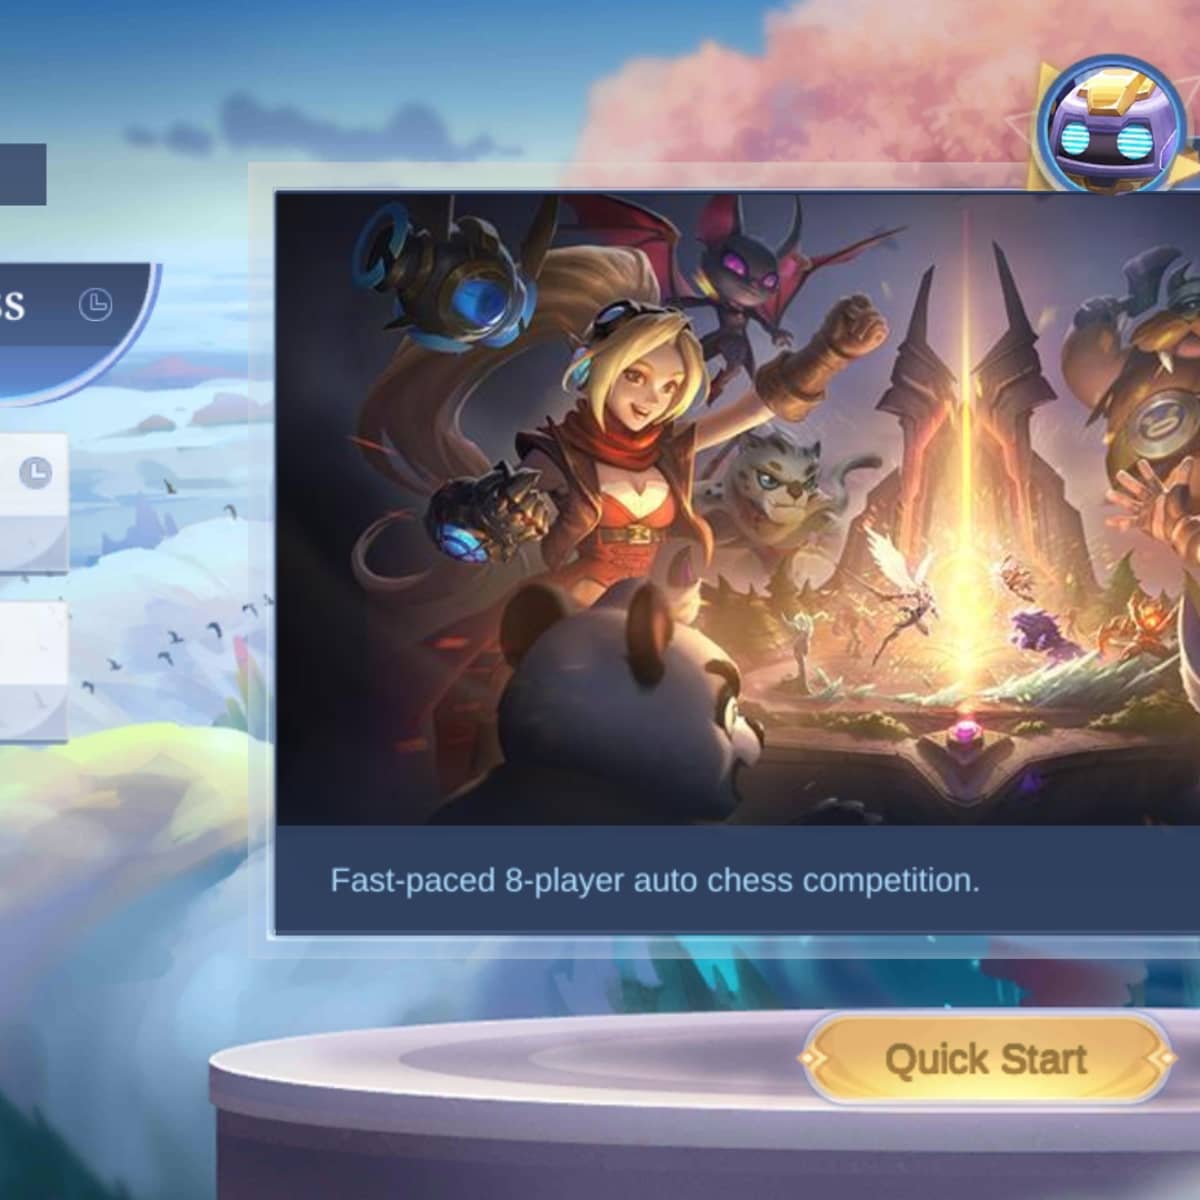 What is Pokemon Auto Chess and how to play it?